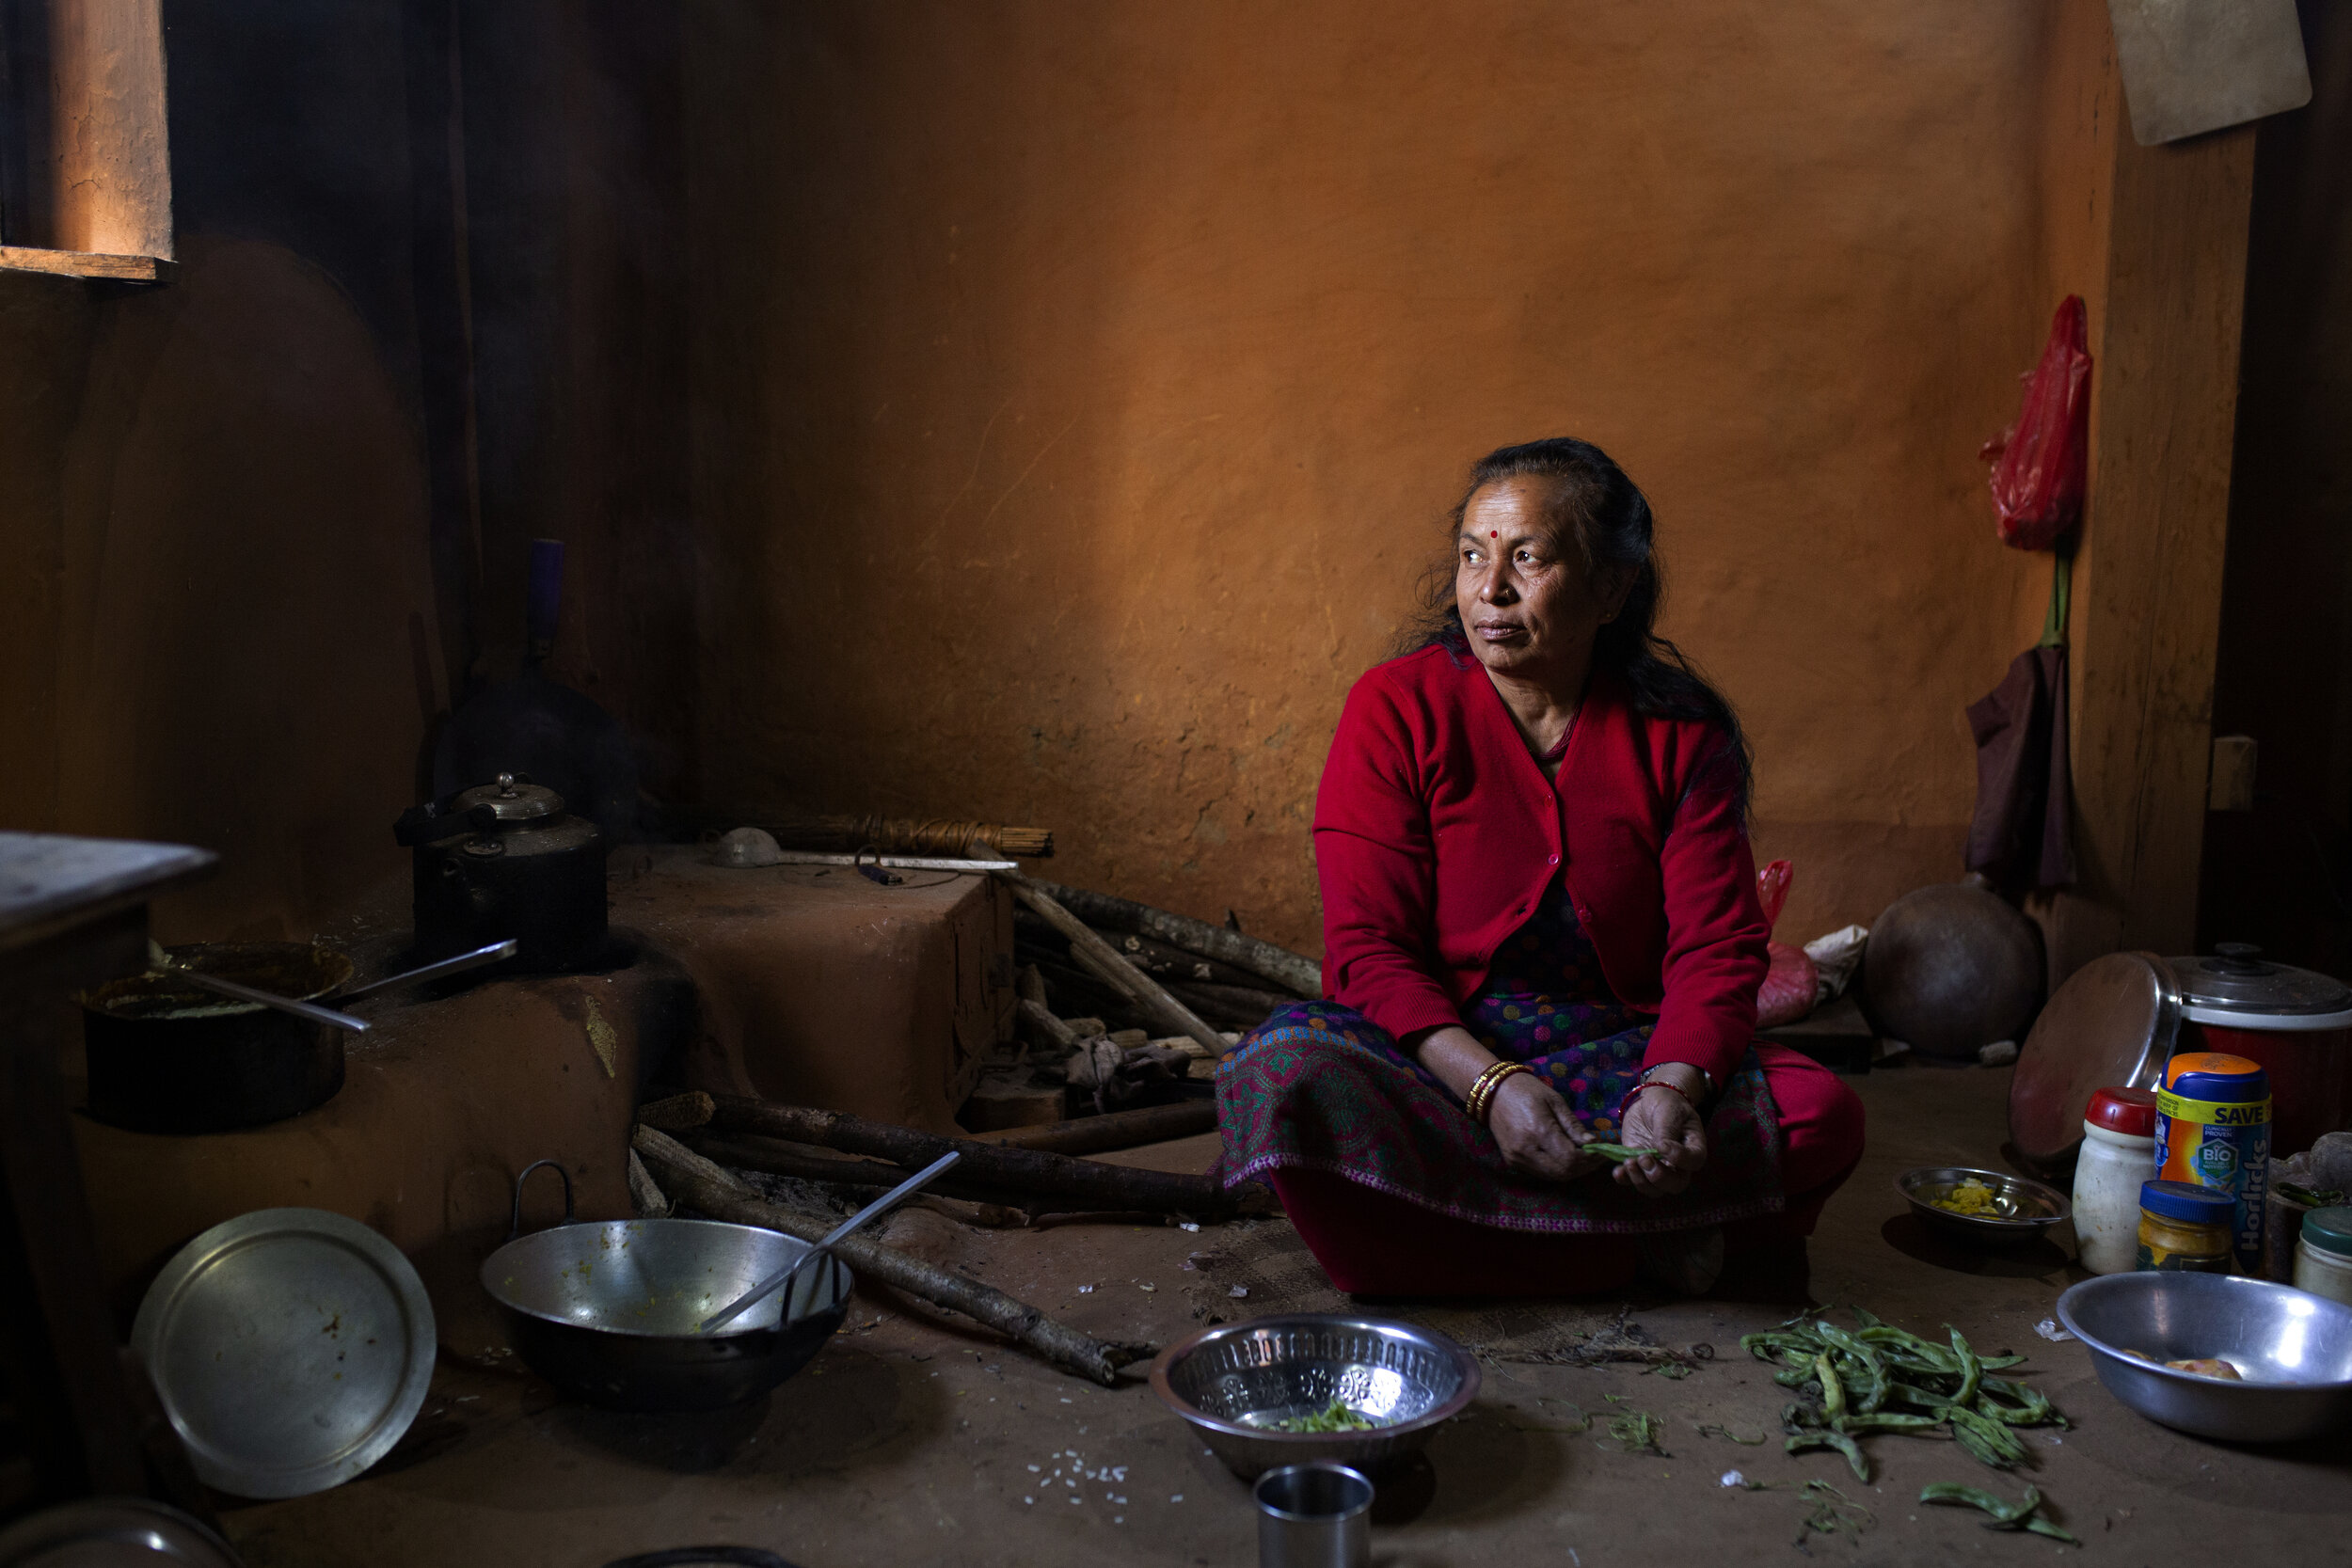   Ama , meaning mother in Nepali, prepares lunch in her home in Rayale.  